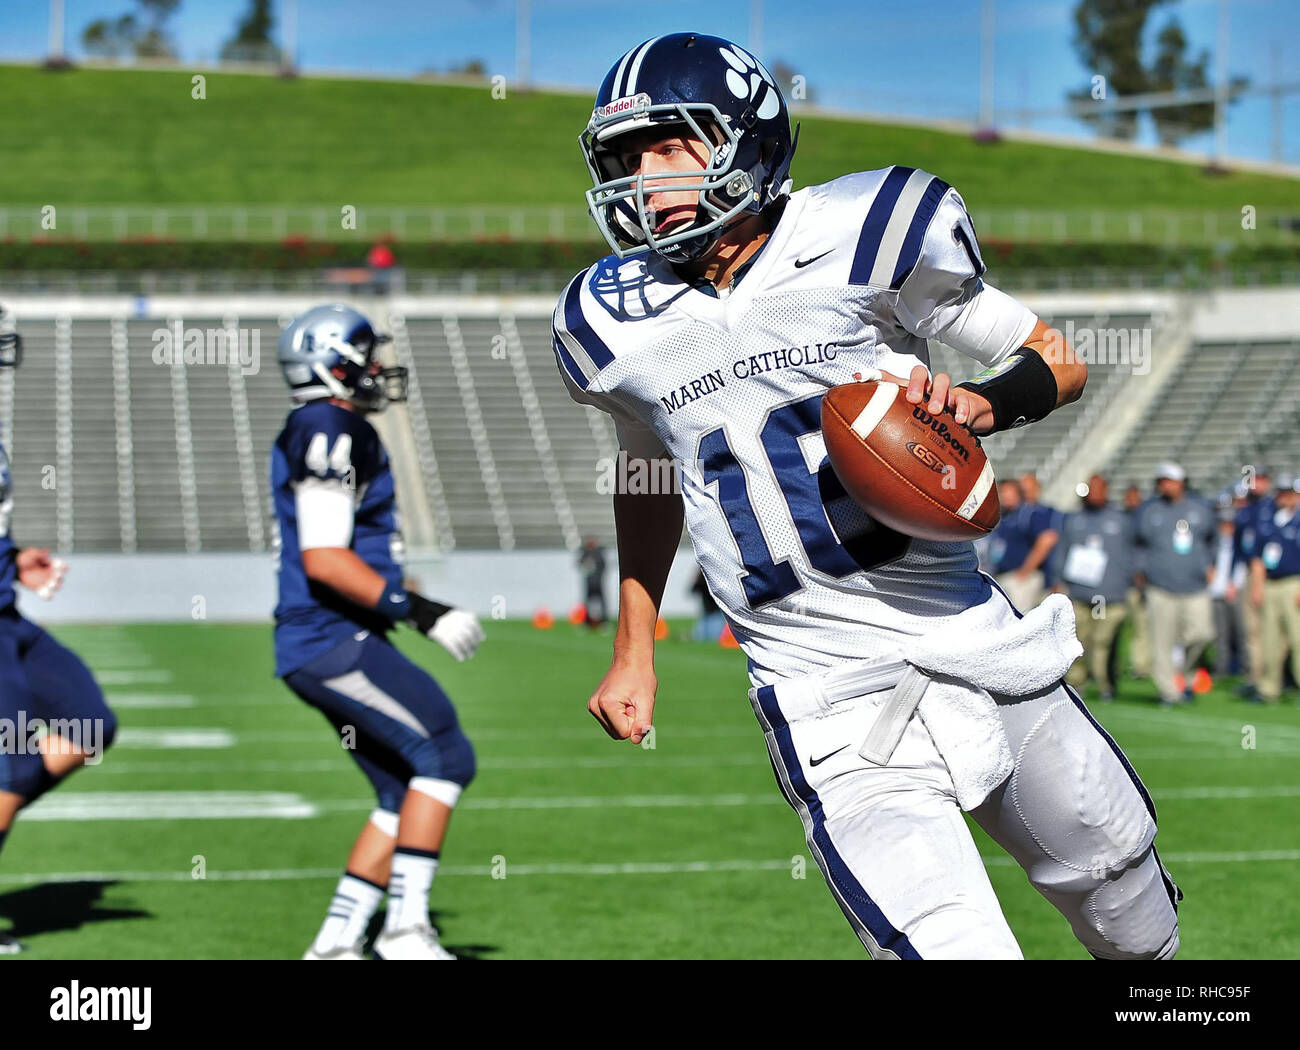 Carson, CA. 15th Dec, 2012. Marin Catholic quarterback Jared Goff #16.The CIF Division 3 California State Football Championship football game between Marin Catholic and Madison at the Home Depot Center in Carson, California.Madison defeats Marin Catholic 38-35.Louis Lopez/CSM/Alamy Live News Stock Photo